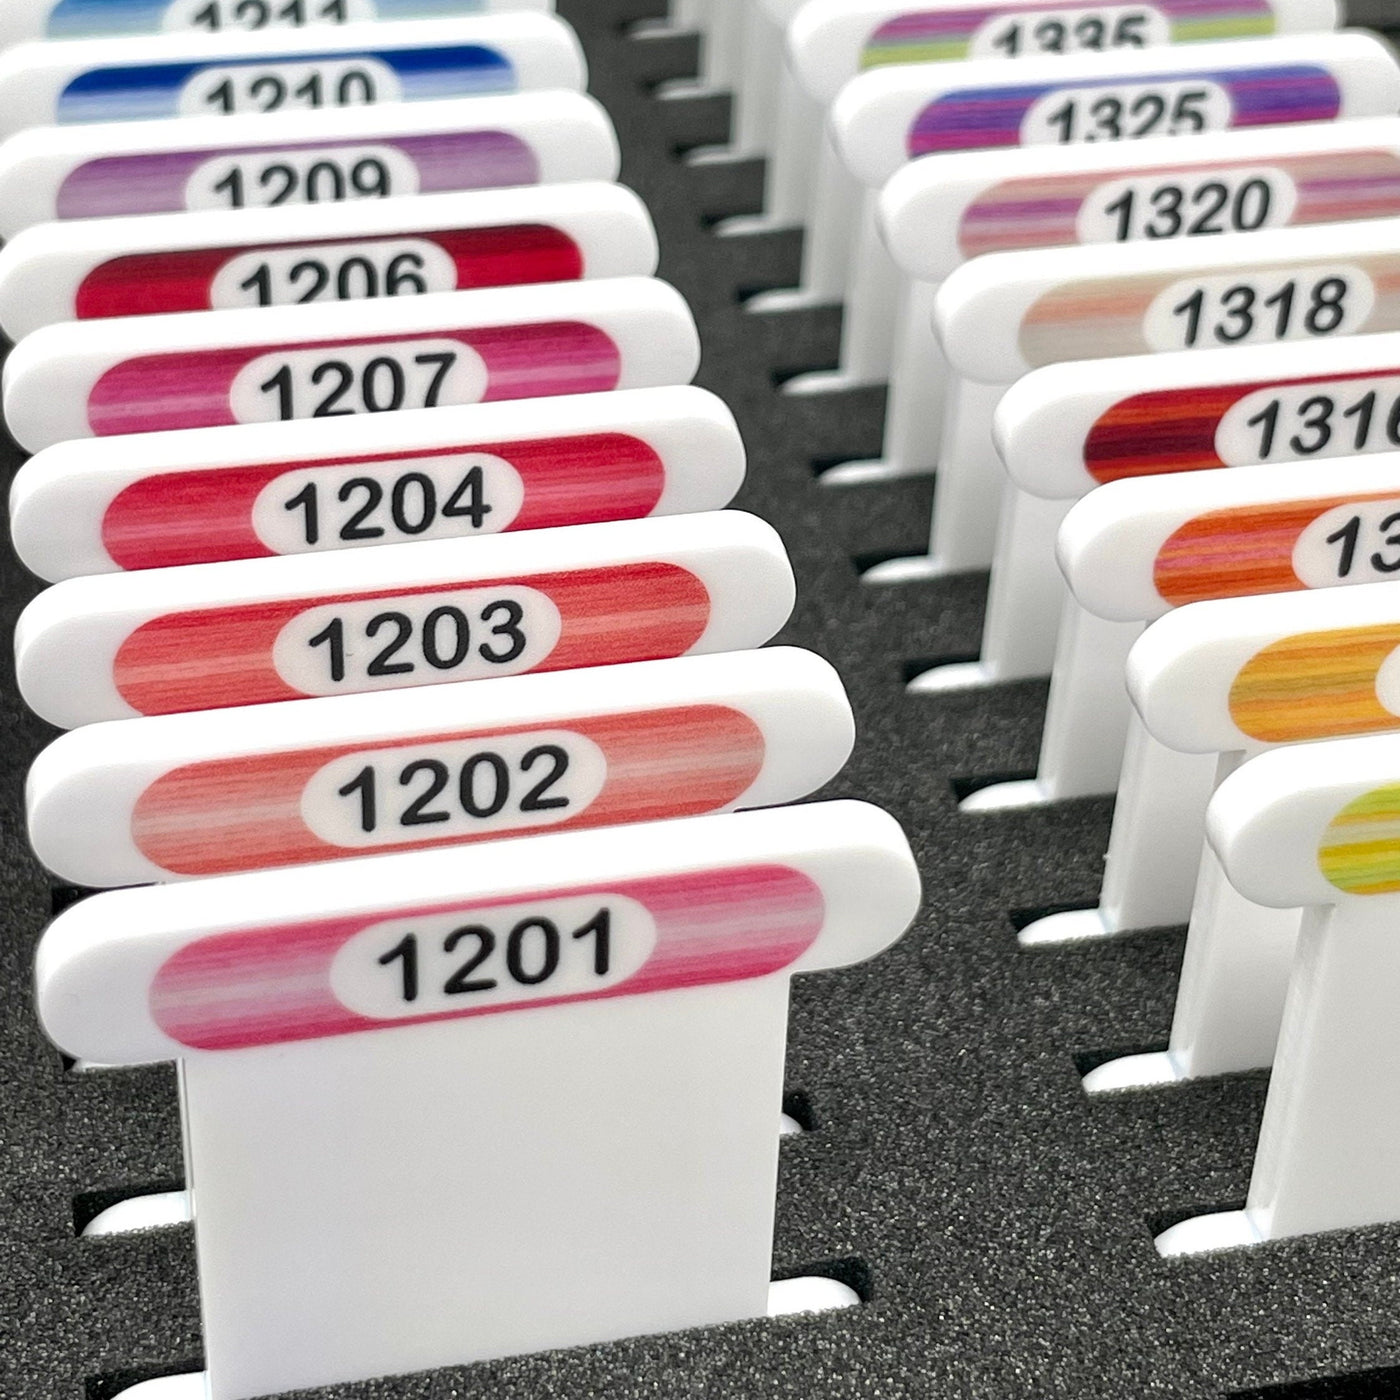 ANCHOR multi-colour (x40 bobbins) 3mm acrylic bobbins with printed number and colour swatch